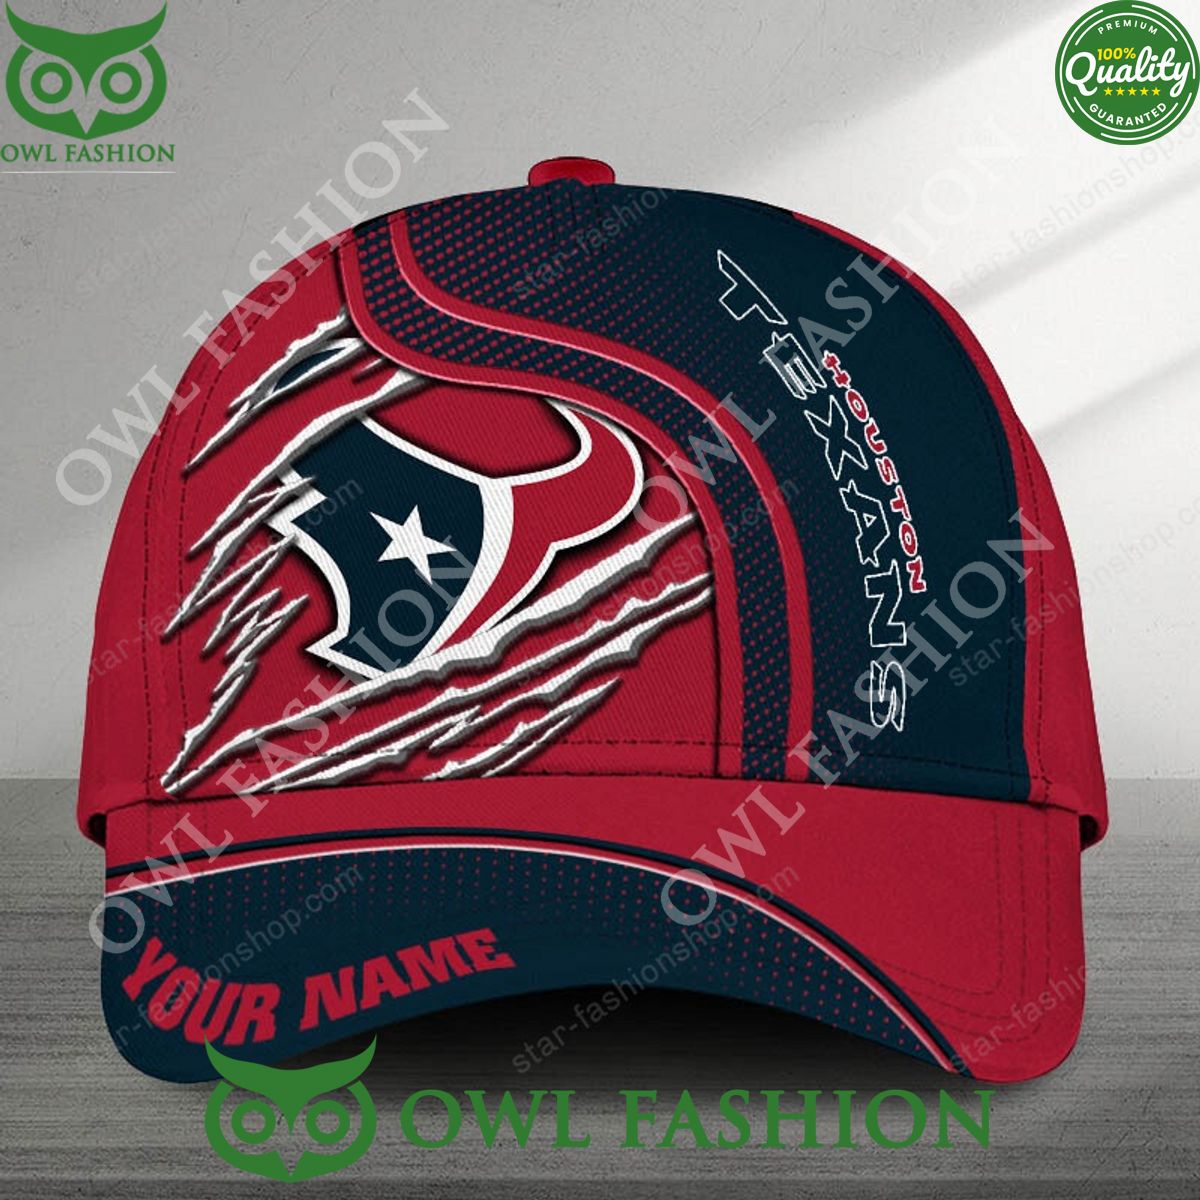 Houston Texans NFL Printed Cap Customized The use of space is excellent.